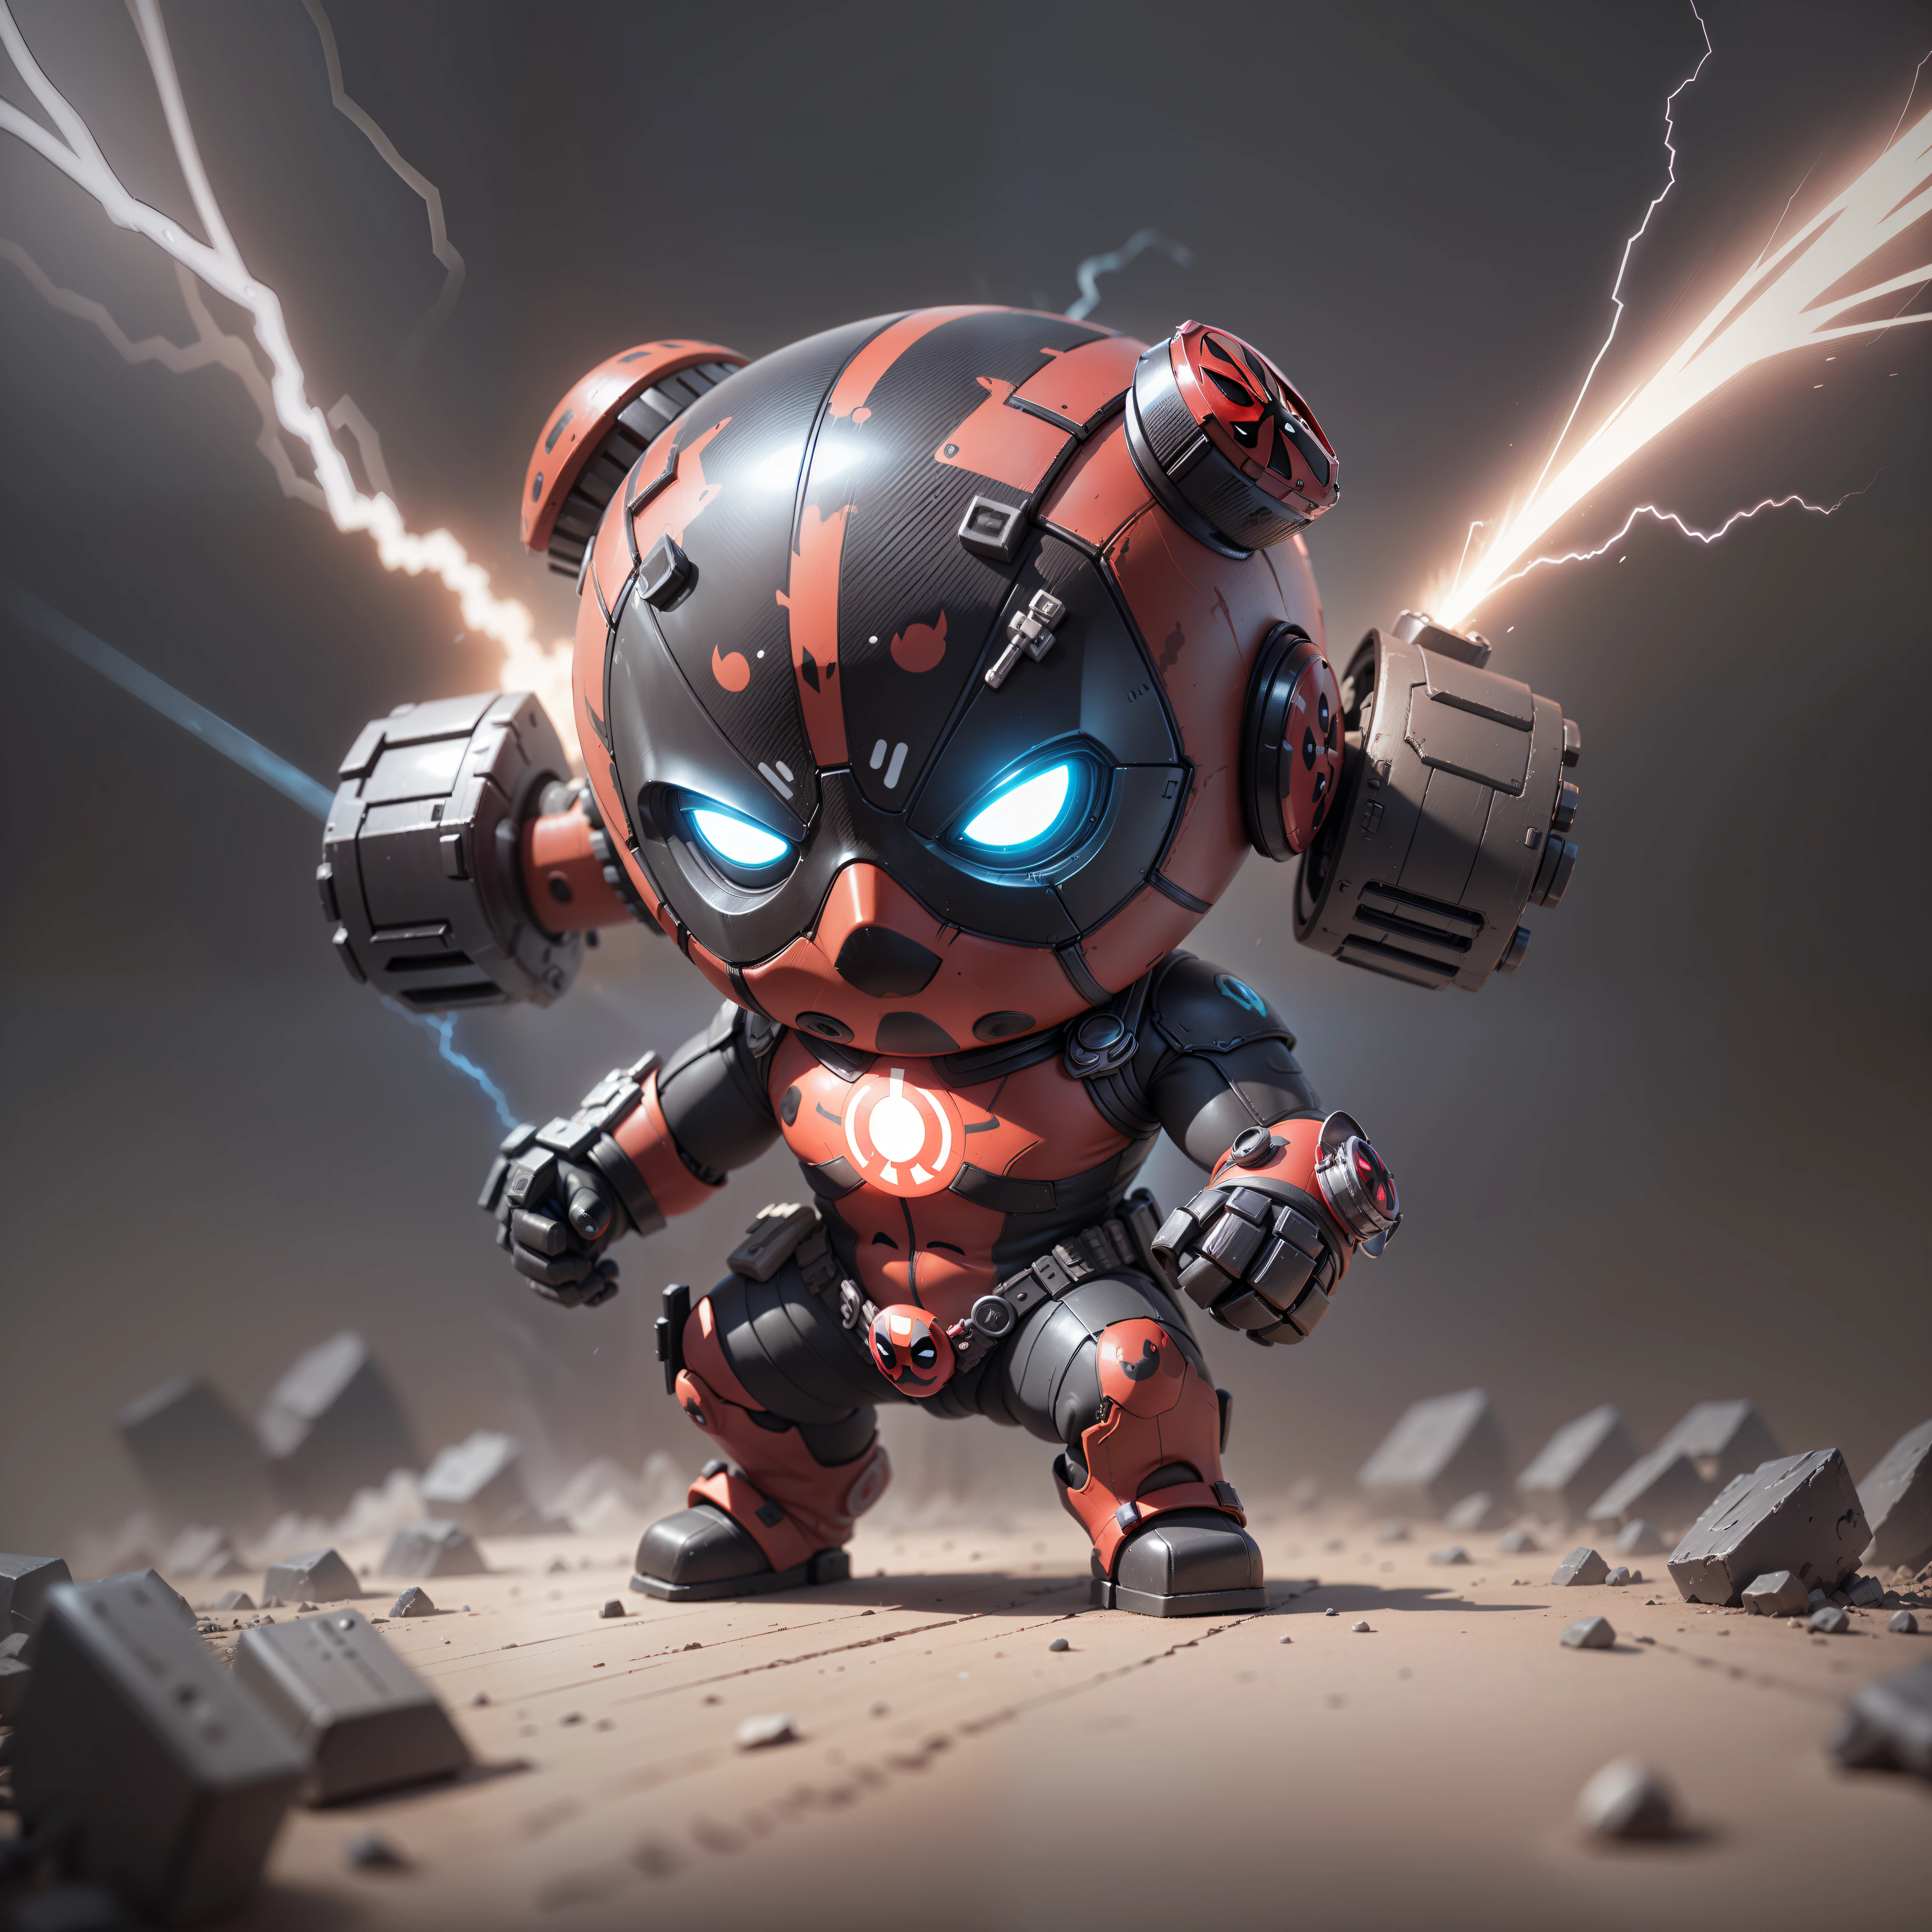 (Mechanical, little deadpool: 1.331), (Mechanical) Cute Style, Small, Lava Jet, 3D Rendering, ((Q Version)), Machine Style, Cinematic Texture, Figures, Movie Lights, Heavy Robotic Arm, Background Surround Lightning, Lightning, Cool, war Background, Ray Tracing, Full Body 3D Model, Action, Stylish Blind Box Toys. (fill body:1.2) chibi